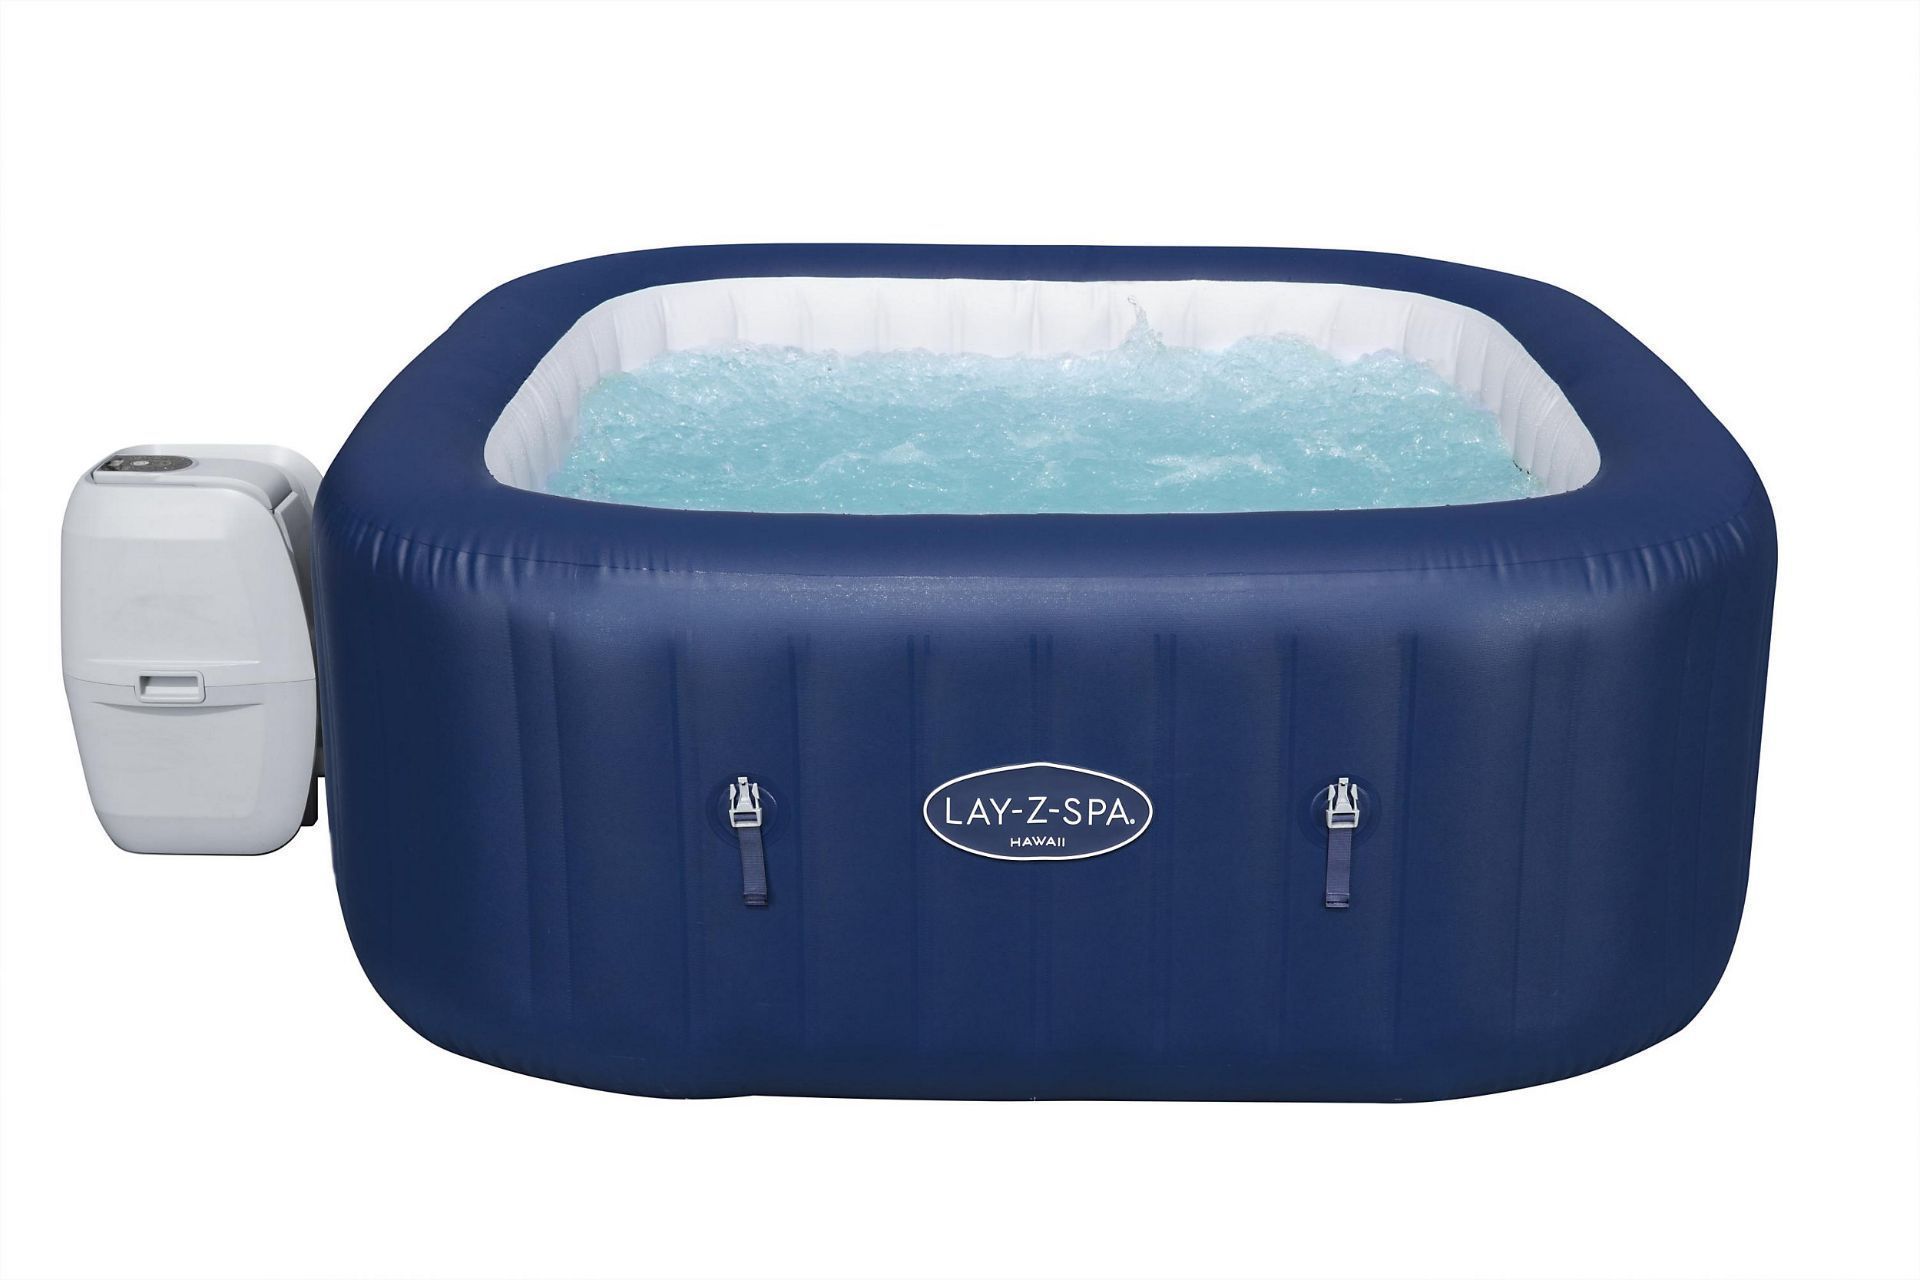 NEW & BOXED LAY-Z-SPA 6 PERSON HAWAII AIRJET. RRP £699 EACH. The Hawaii AirJet™ offers the perfect